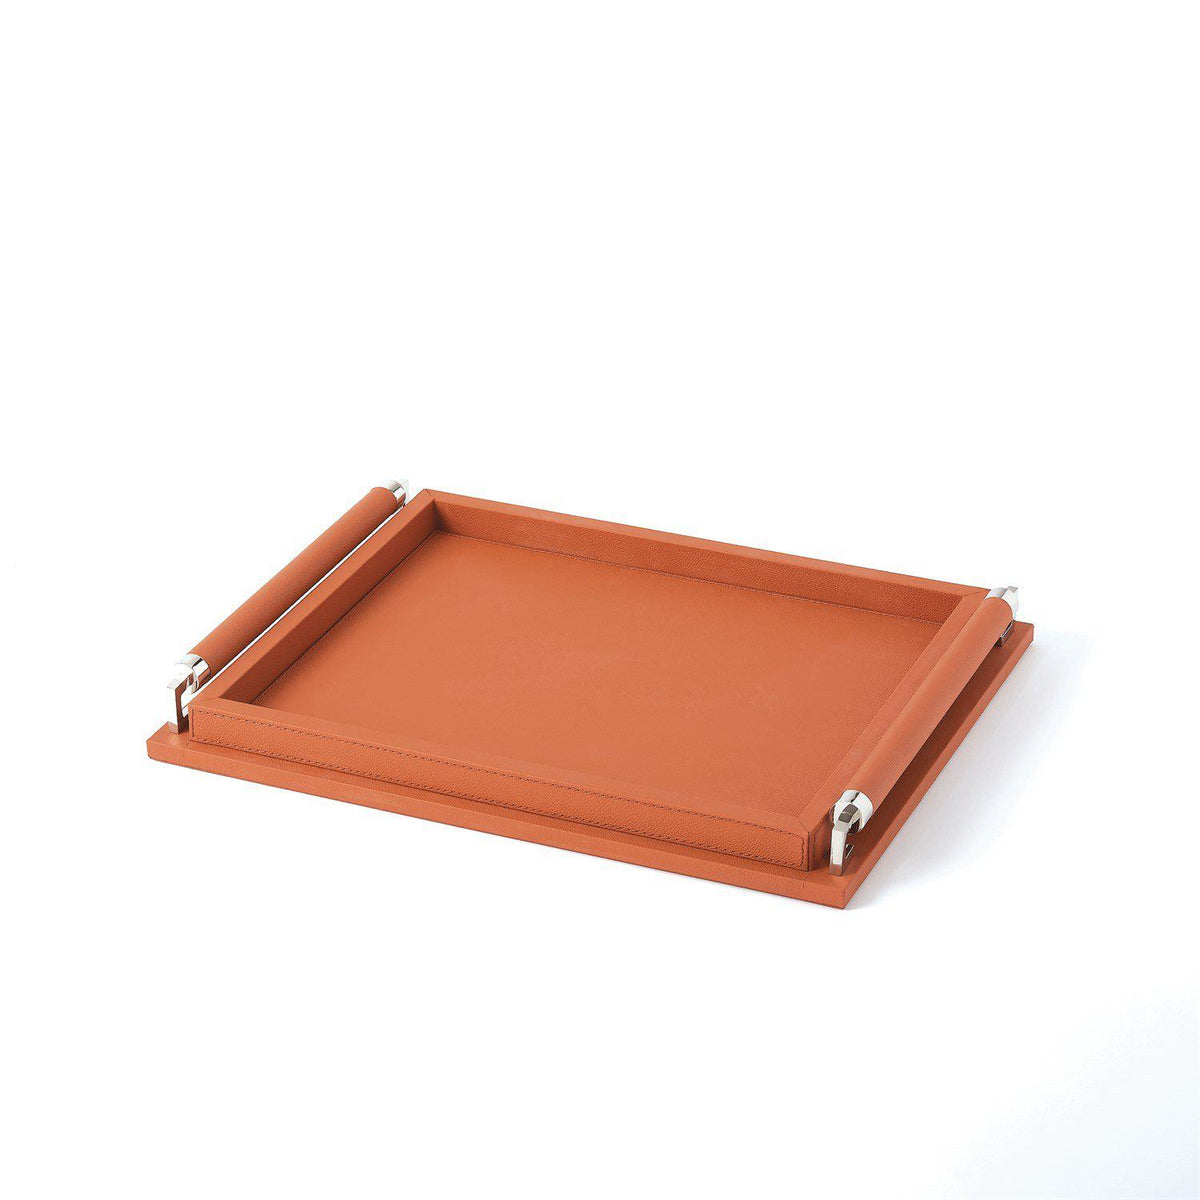 Wrapped Handle Tray-Global Views-Trays-Artistic Elements